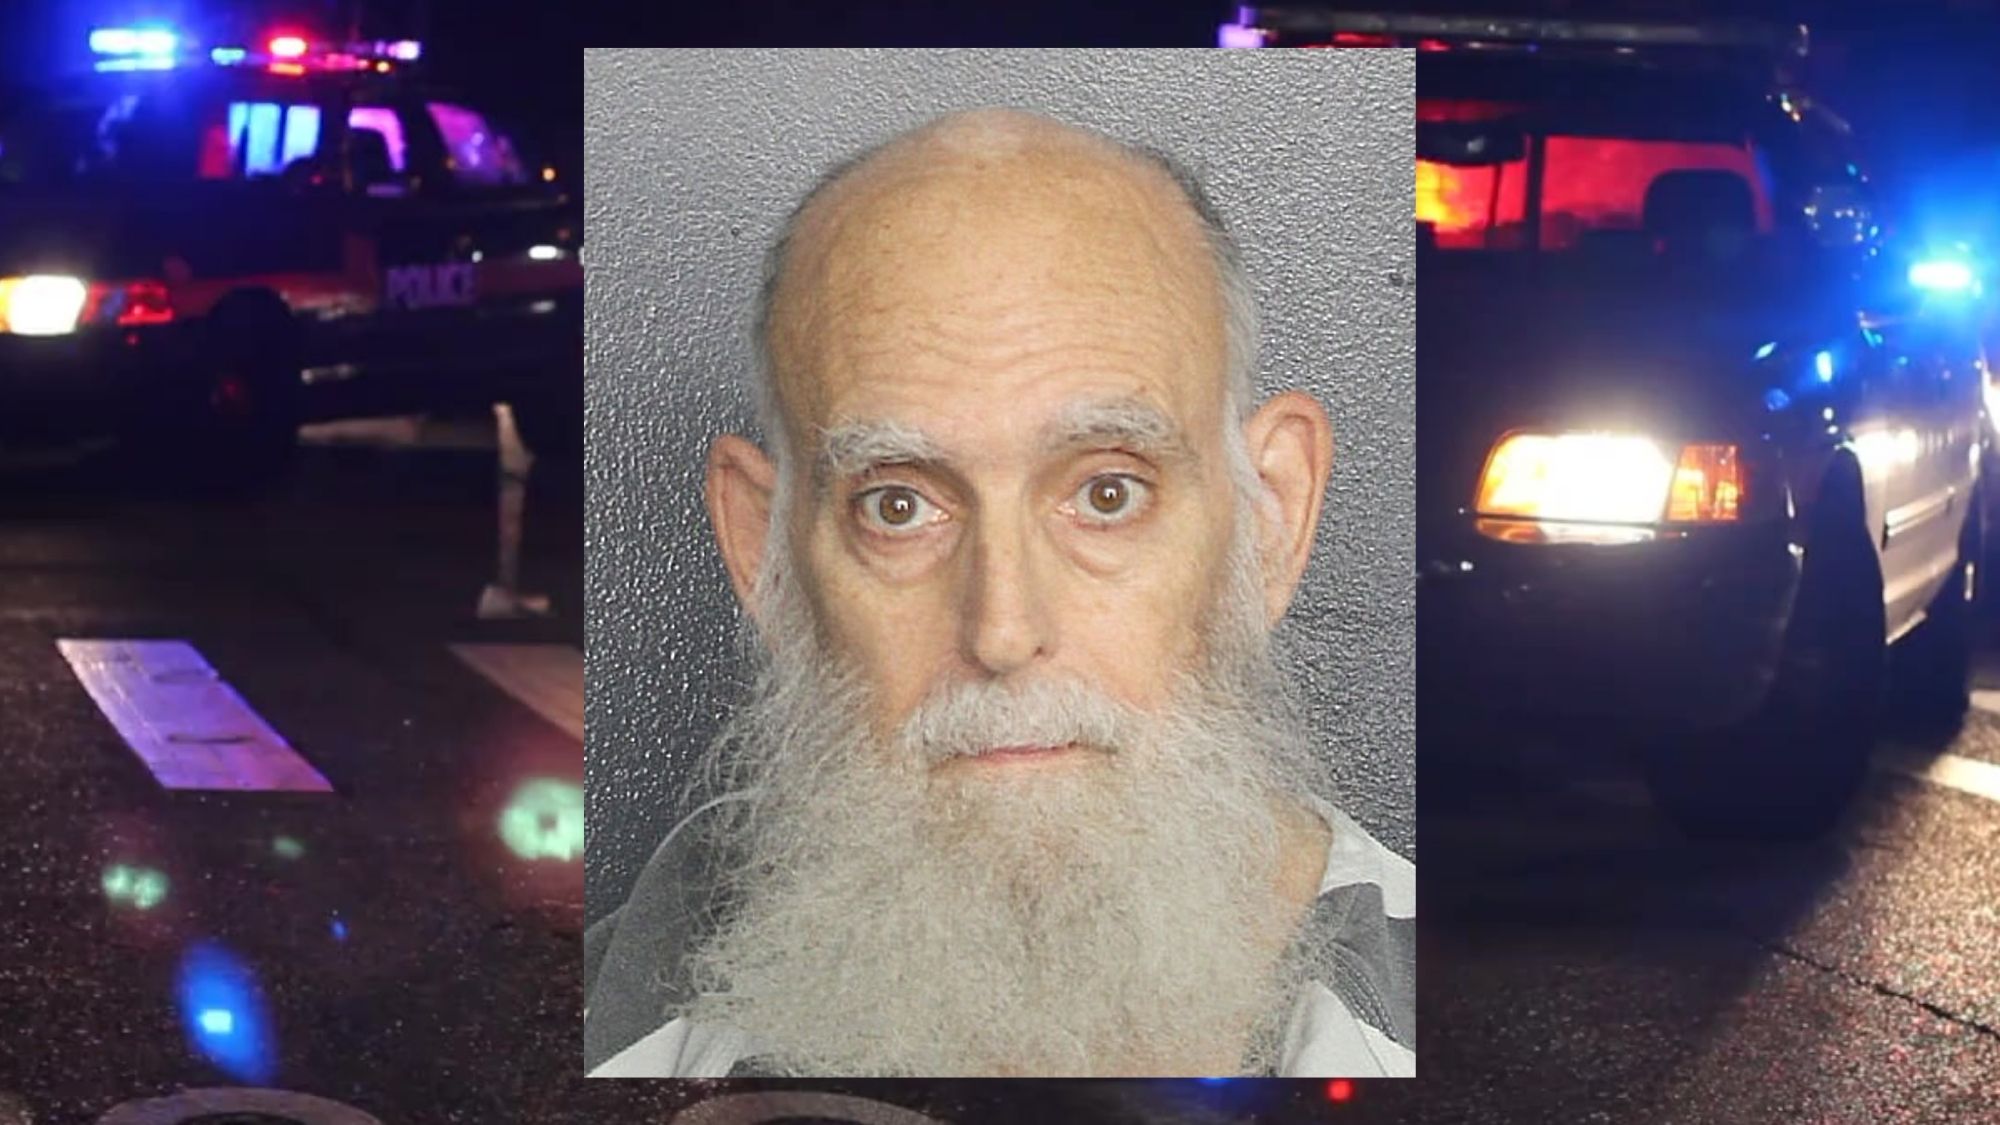 Tamarac Man Arrested For Battery and Child Abuse; Claims Antisemitism